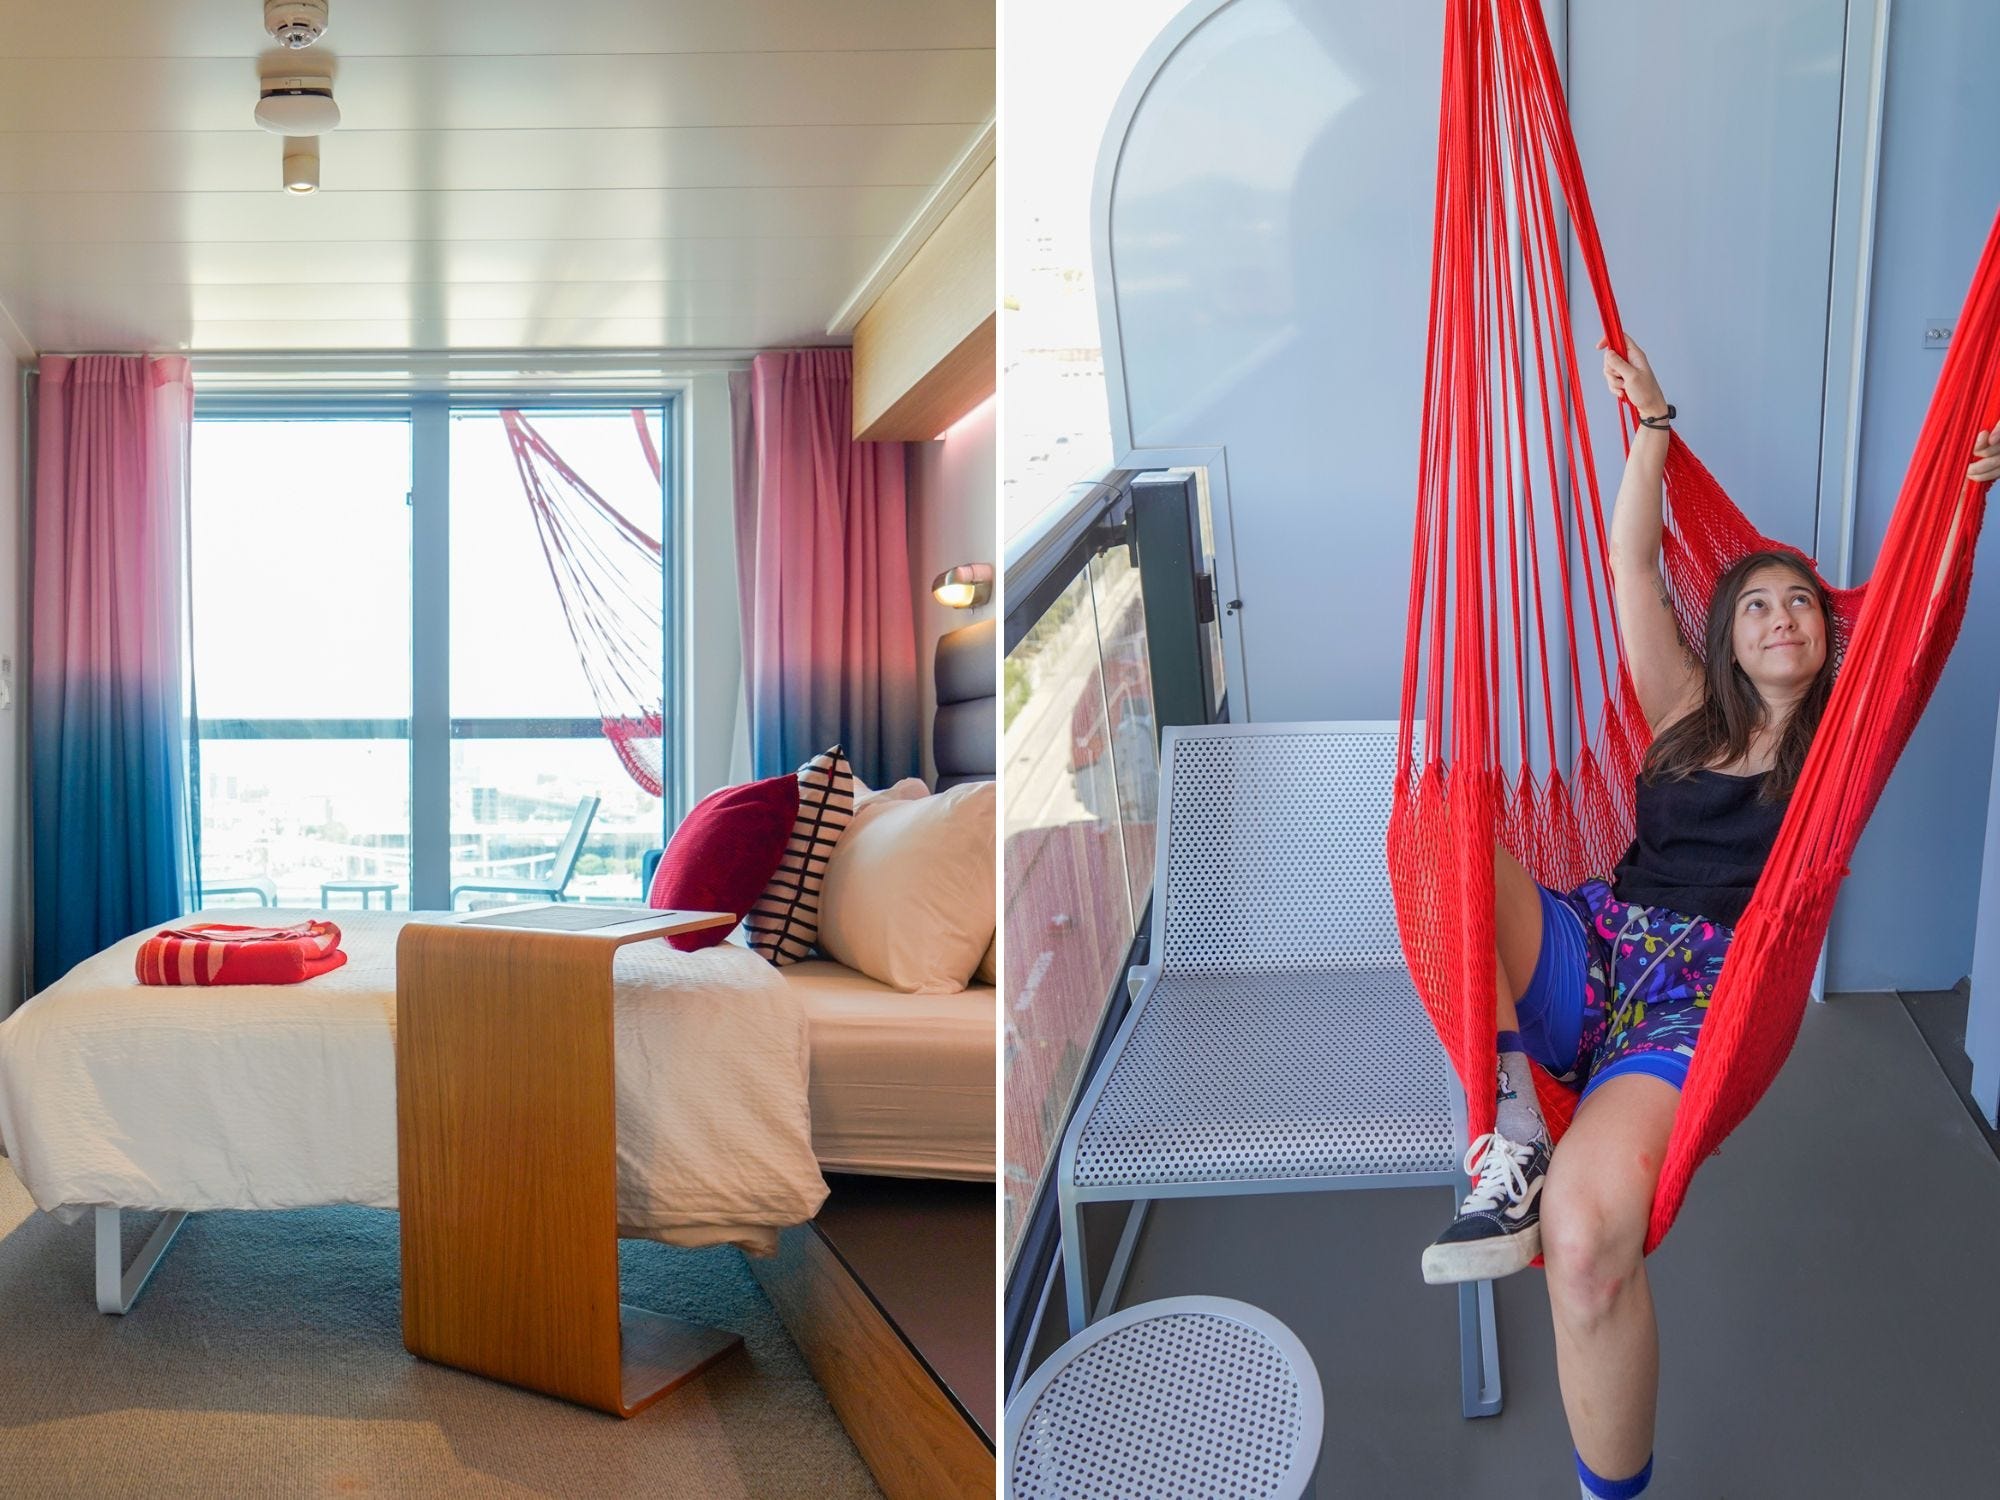 <p>The ship has 1,408 cabins and suites, <a href="https://www.virginvoyages.com/dam/jcr:5fc31980-63ac-4522-af8f-a9cb1512d200/Virgin%20Voyages%20Full%20Fact%20Sheet.pdf?pdfInline=true" rel="noopener">according to the cruise line</a>. I booked a mid-tier <a href="https://www.insider.com/virgin-voyages-sea-terrace-room-balcony-photo-cruise-cabin-tour-2023-8">stateroom with a balcony</a> — a step above sea-view cabins, which only have a window. Insider received a media rate for the cruise.</p><p>The room was 225 square feet, including the balcony. I thought the cabin made great use of the tiny space while including luxury details, from smart controls to a private terrace.</p>